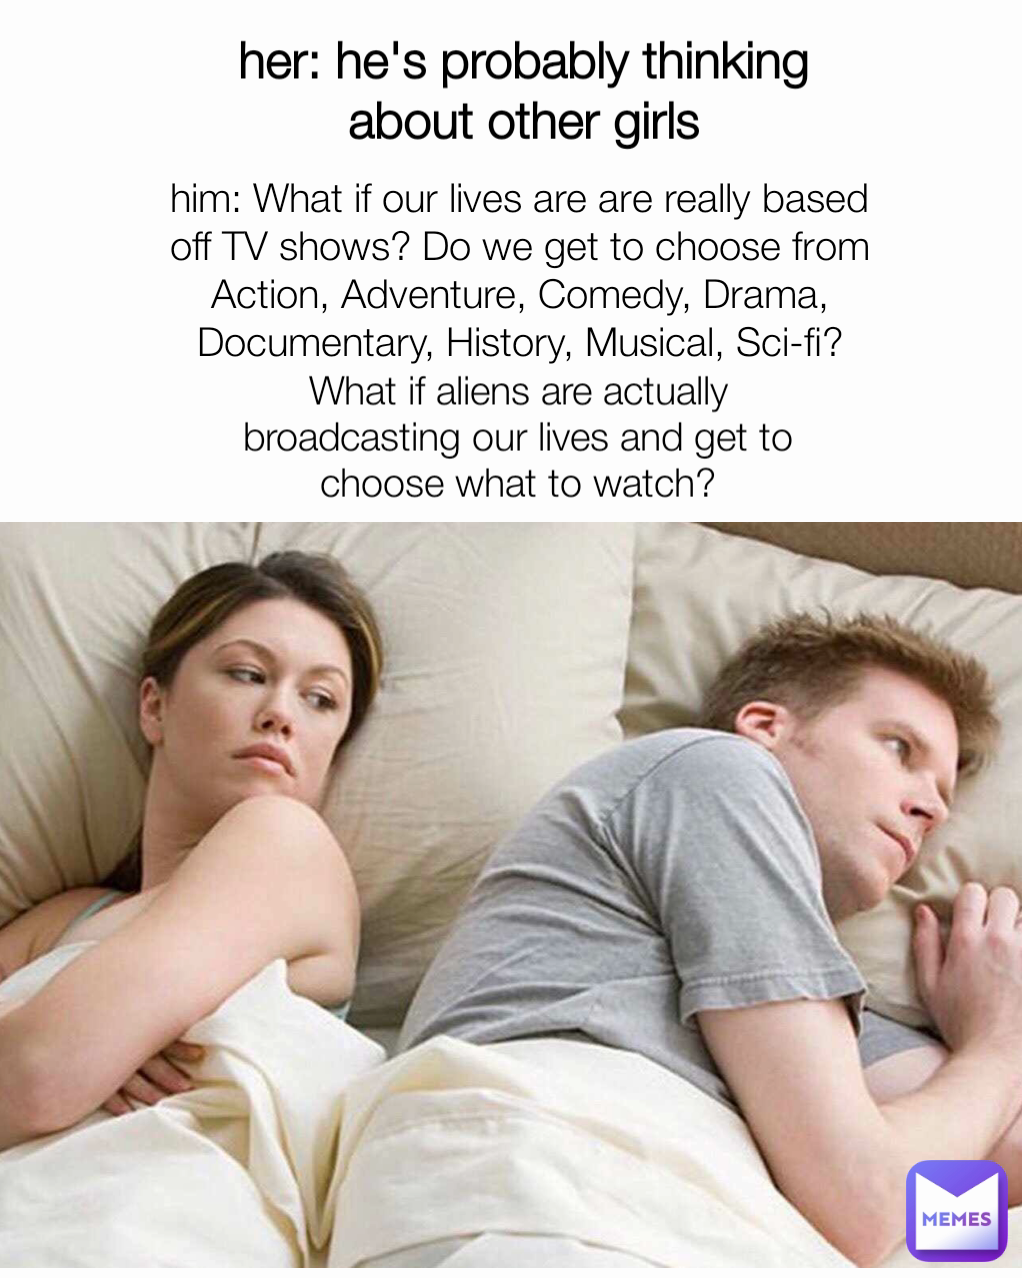 her: he's probably thinking about other girls What if aliens are actually broadcasting our lives and get to choose what to watch? him: What if our lives are are really based off TV shows? Do we get to choose from Action, Adventure, Comedy, Drama, Documentary, History, Musical, Sci-fi?